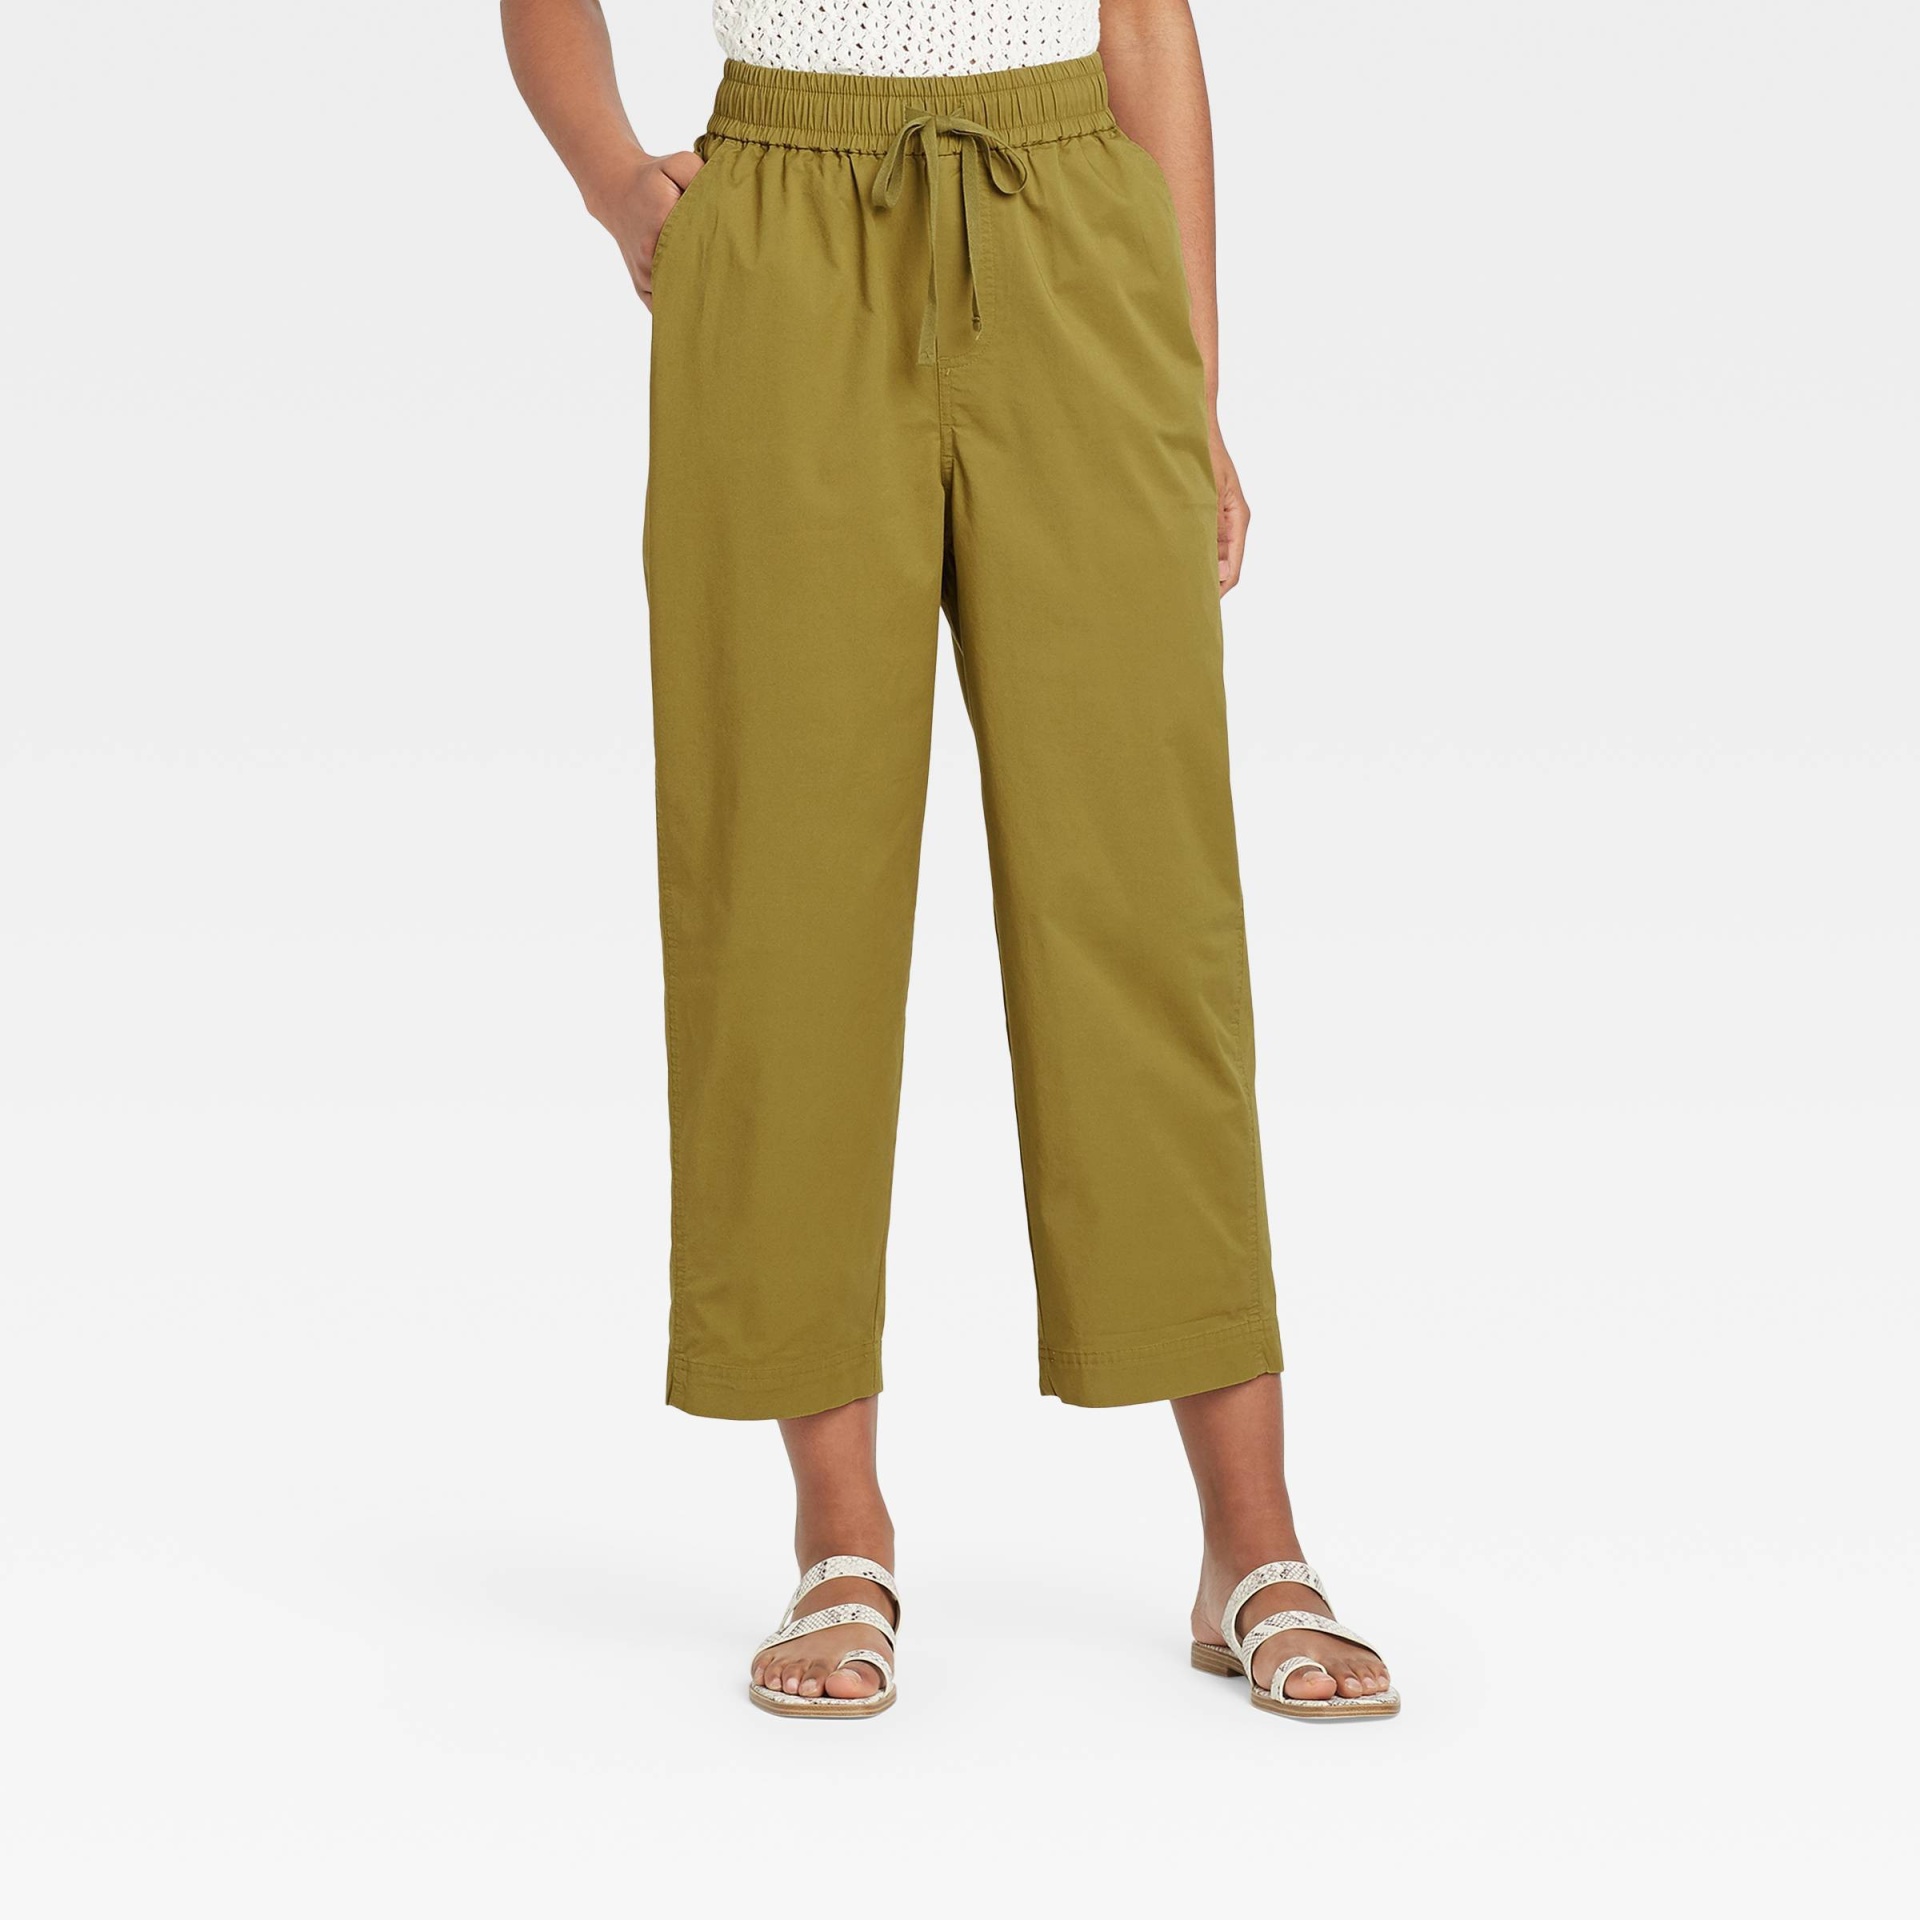 slide 1 of 3, Women's High-Rise Relaxed Fit Pull-On Ankle Pants - A New Day Olive Green XS, 1 ct